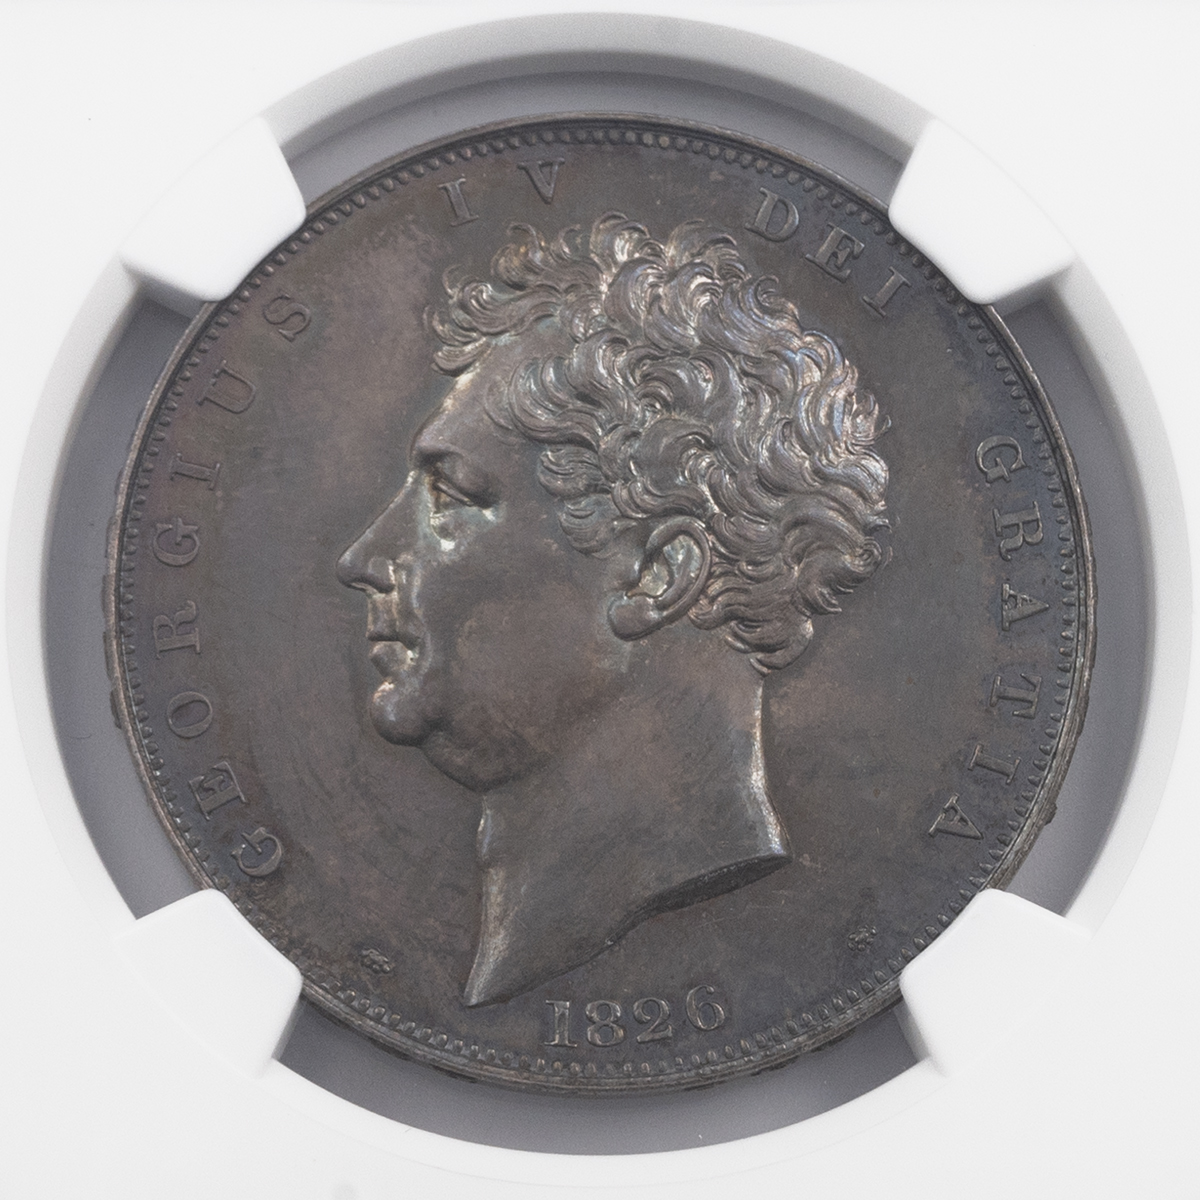 1826 proof Crown of King George IV, ex Norweb collection, graded PF 64 by NGC (S 3806, Bull 2336)... - Image 2 of 4